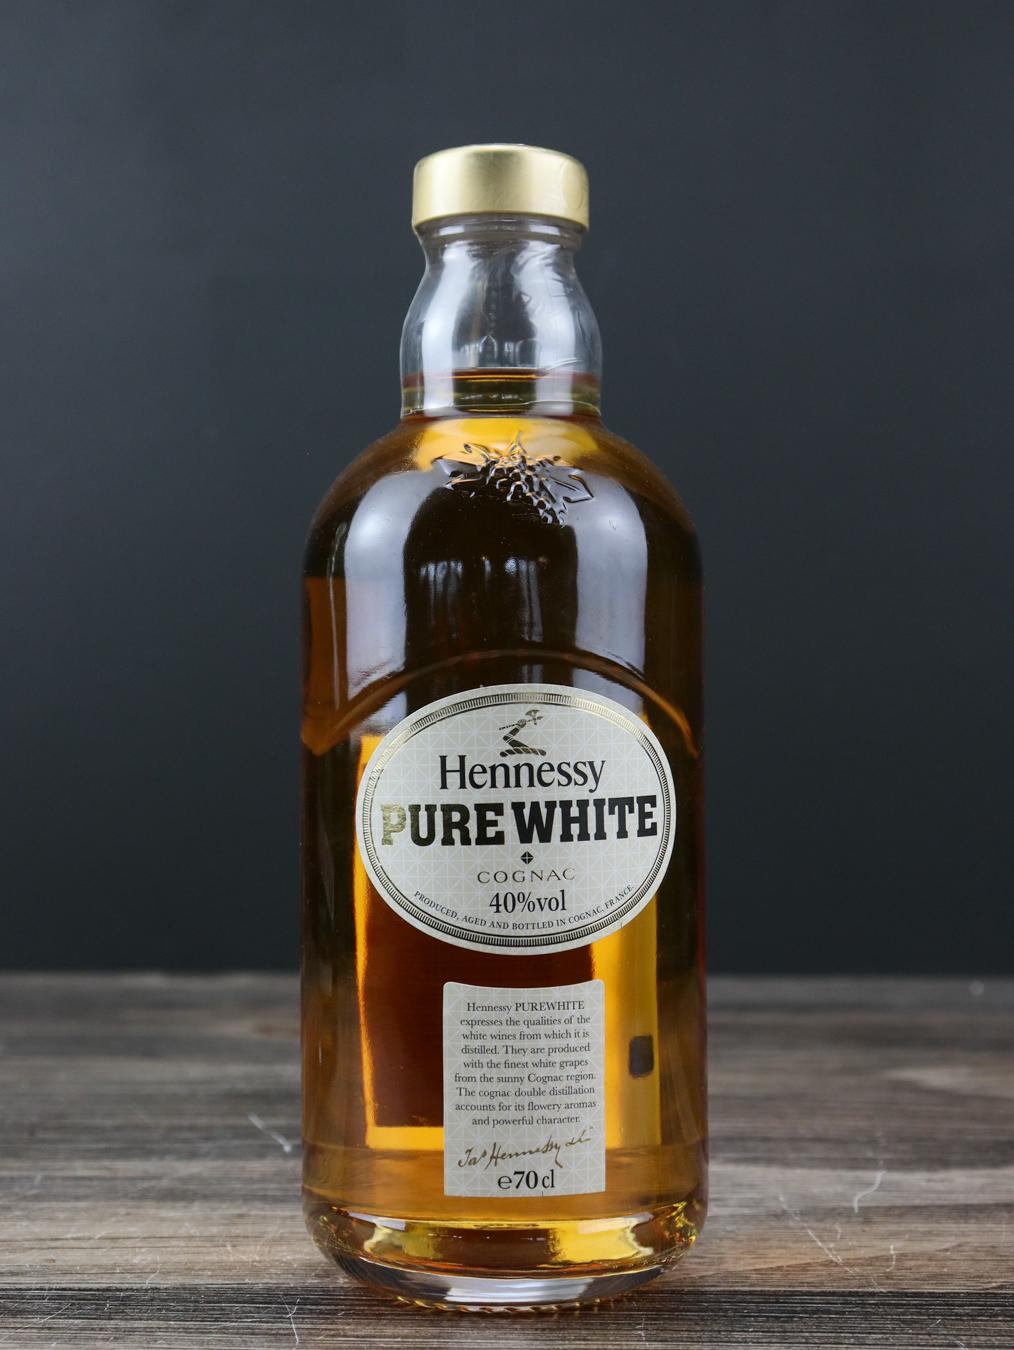 BUY] Hennessy Pure White Cognac (RECOMMENDED) at